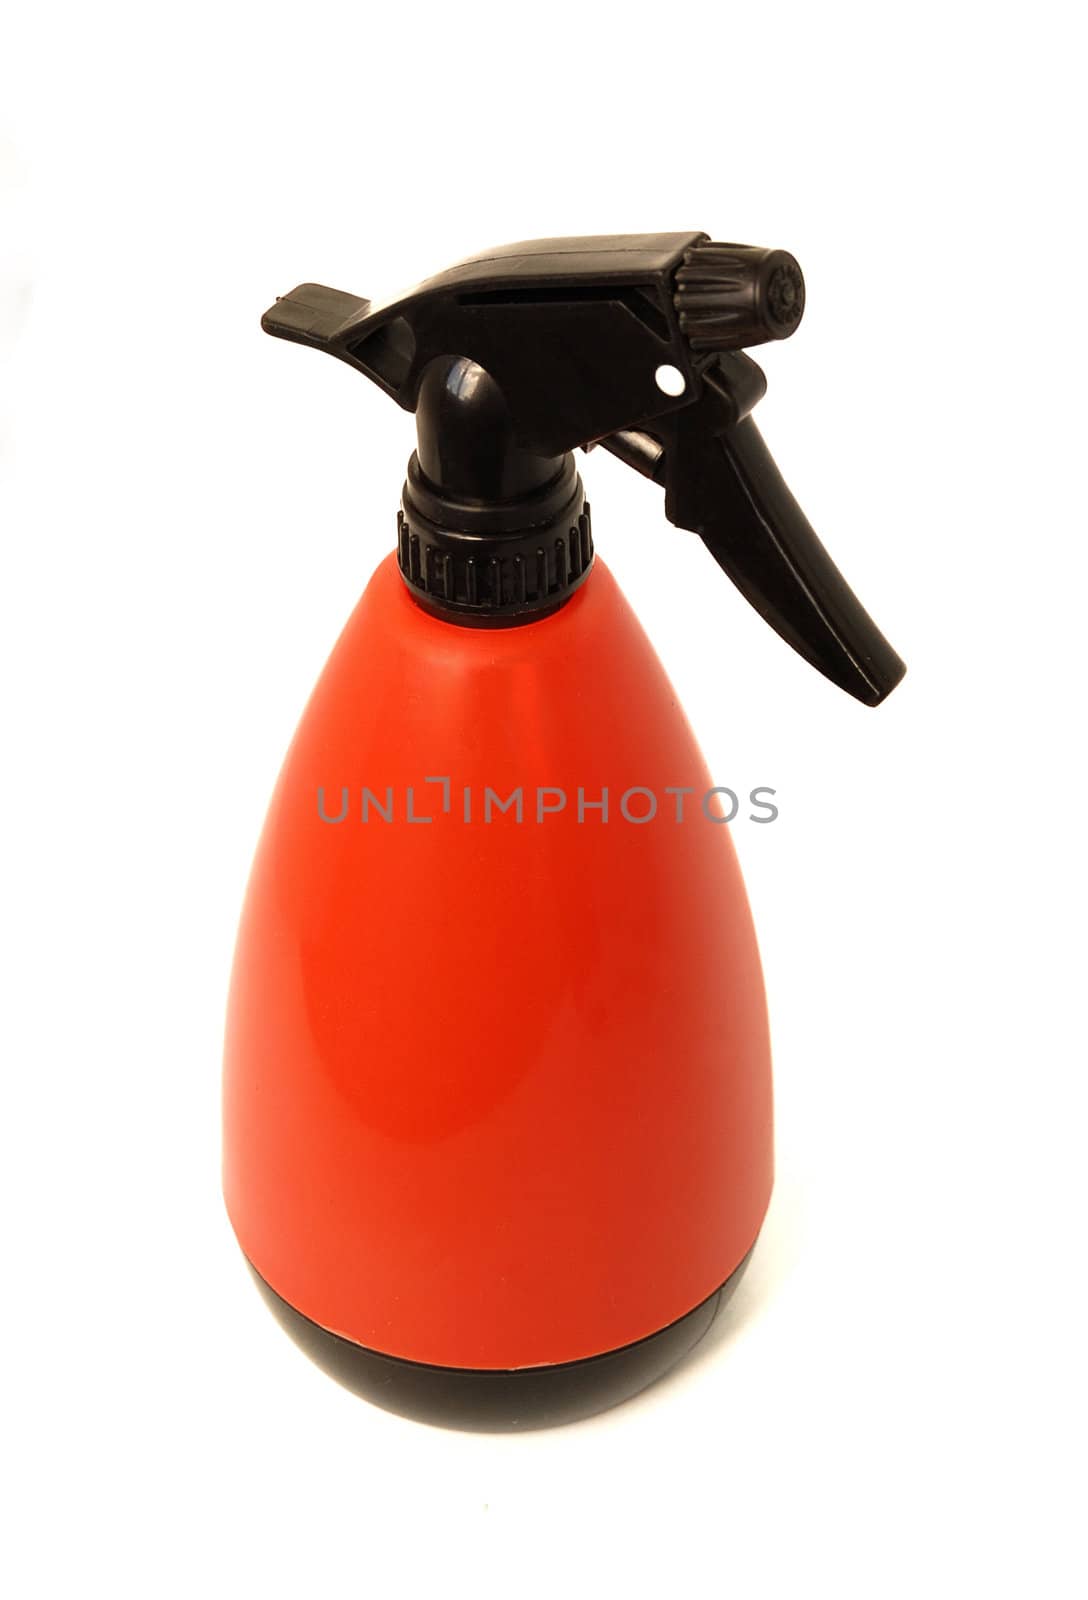 plastic water sprayer of orange color isolated on white